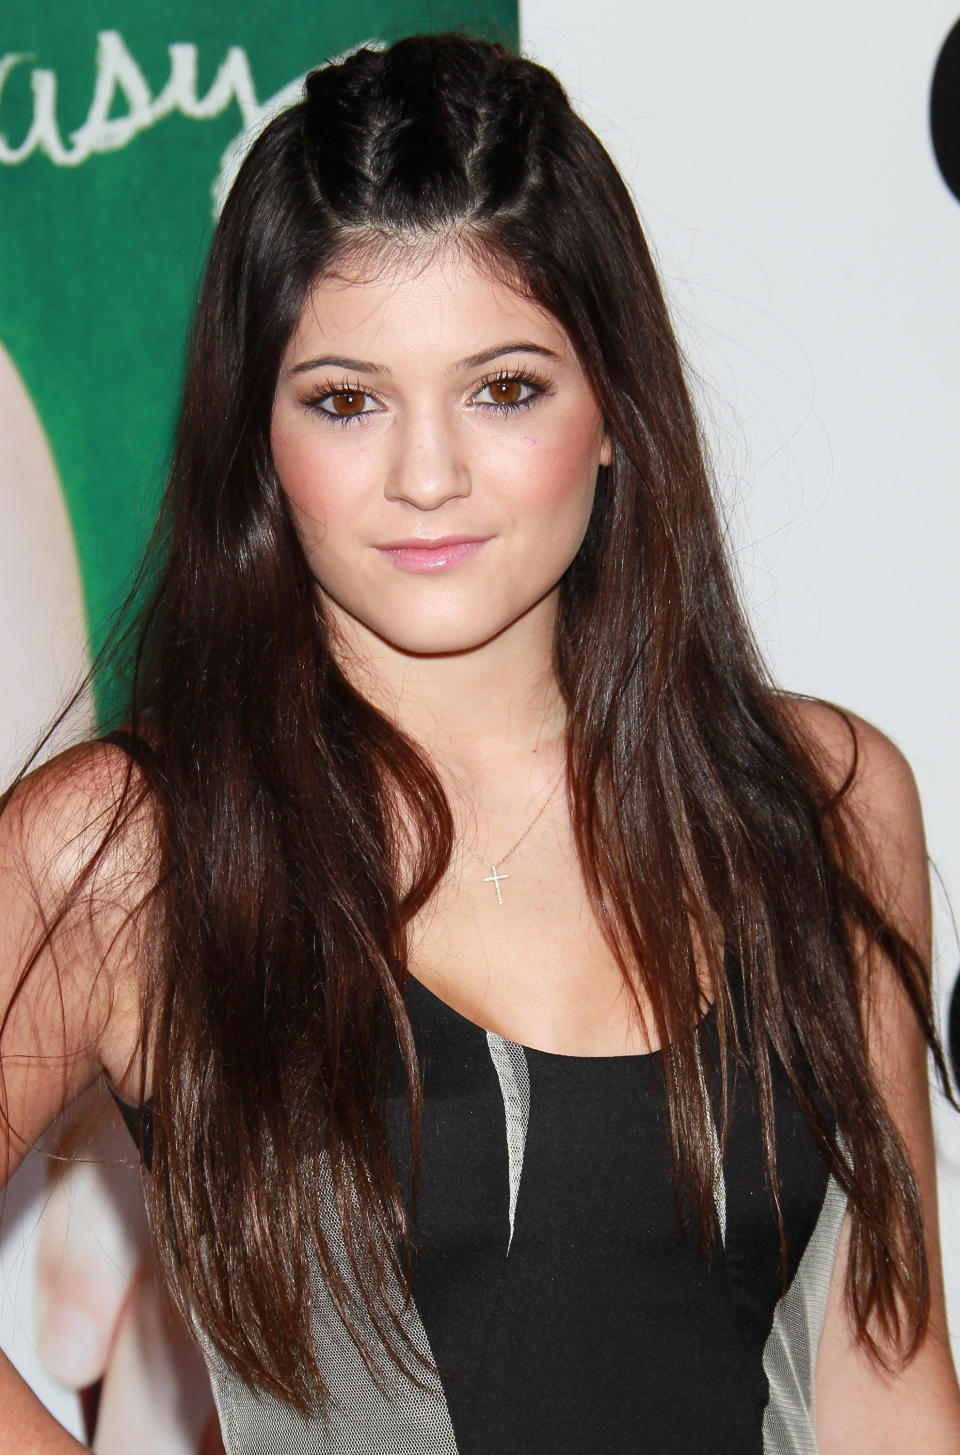 HOLLYWOOD - SEPTEMBER 13:  TV personality Kylie Jenner attends the premiere of Screen Gems' 'Easy A' at Grauman's Chinese Theatre on September 13, 2010 in Hollywood, California.  (Photo by David Livingston/Getty Images)